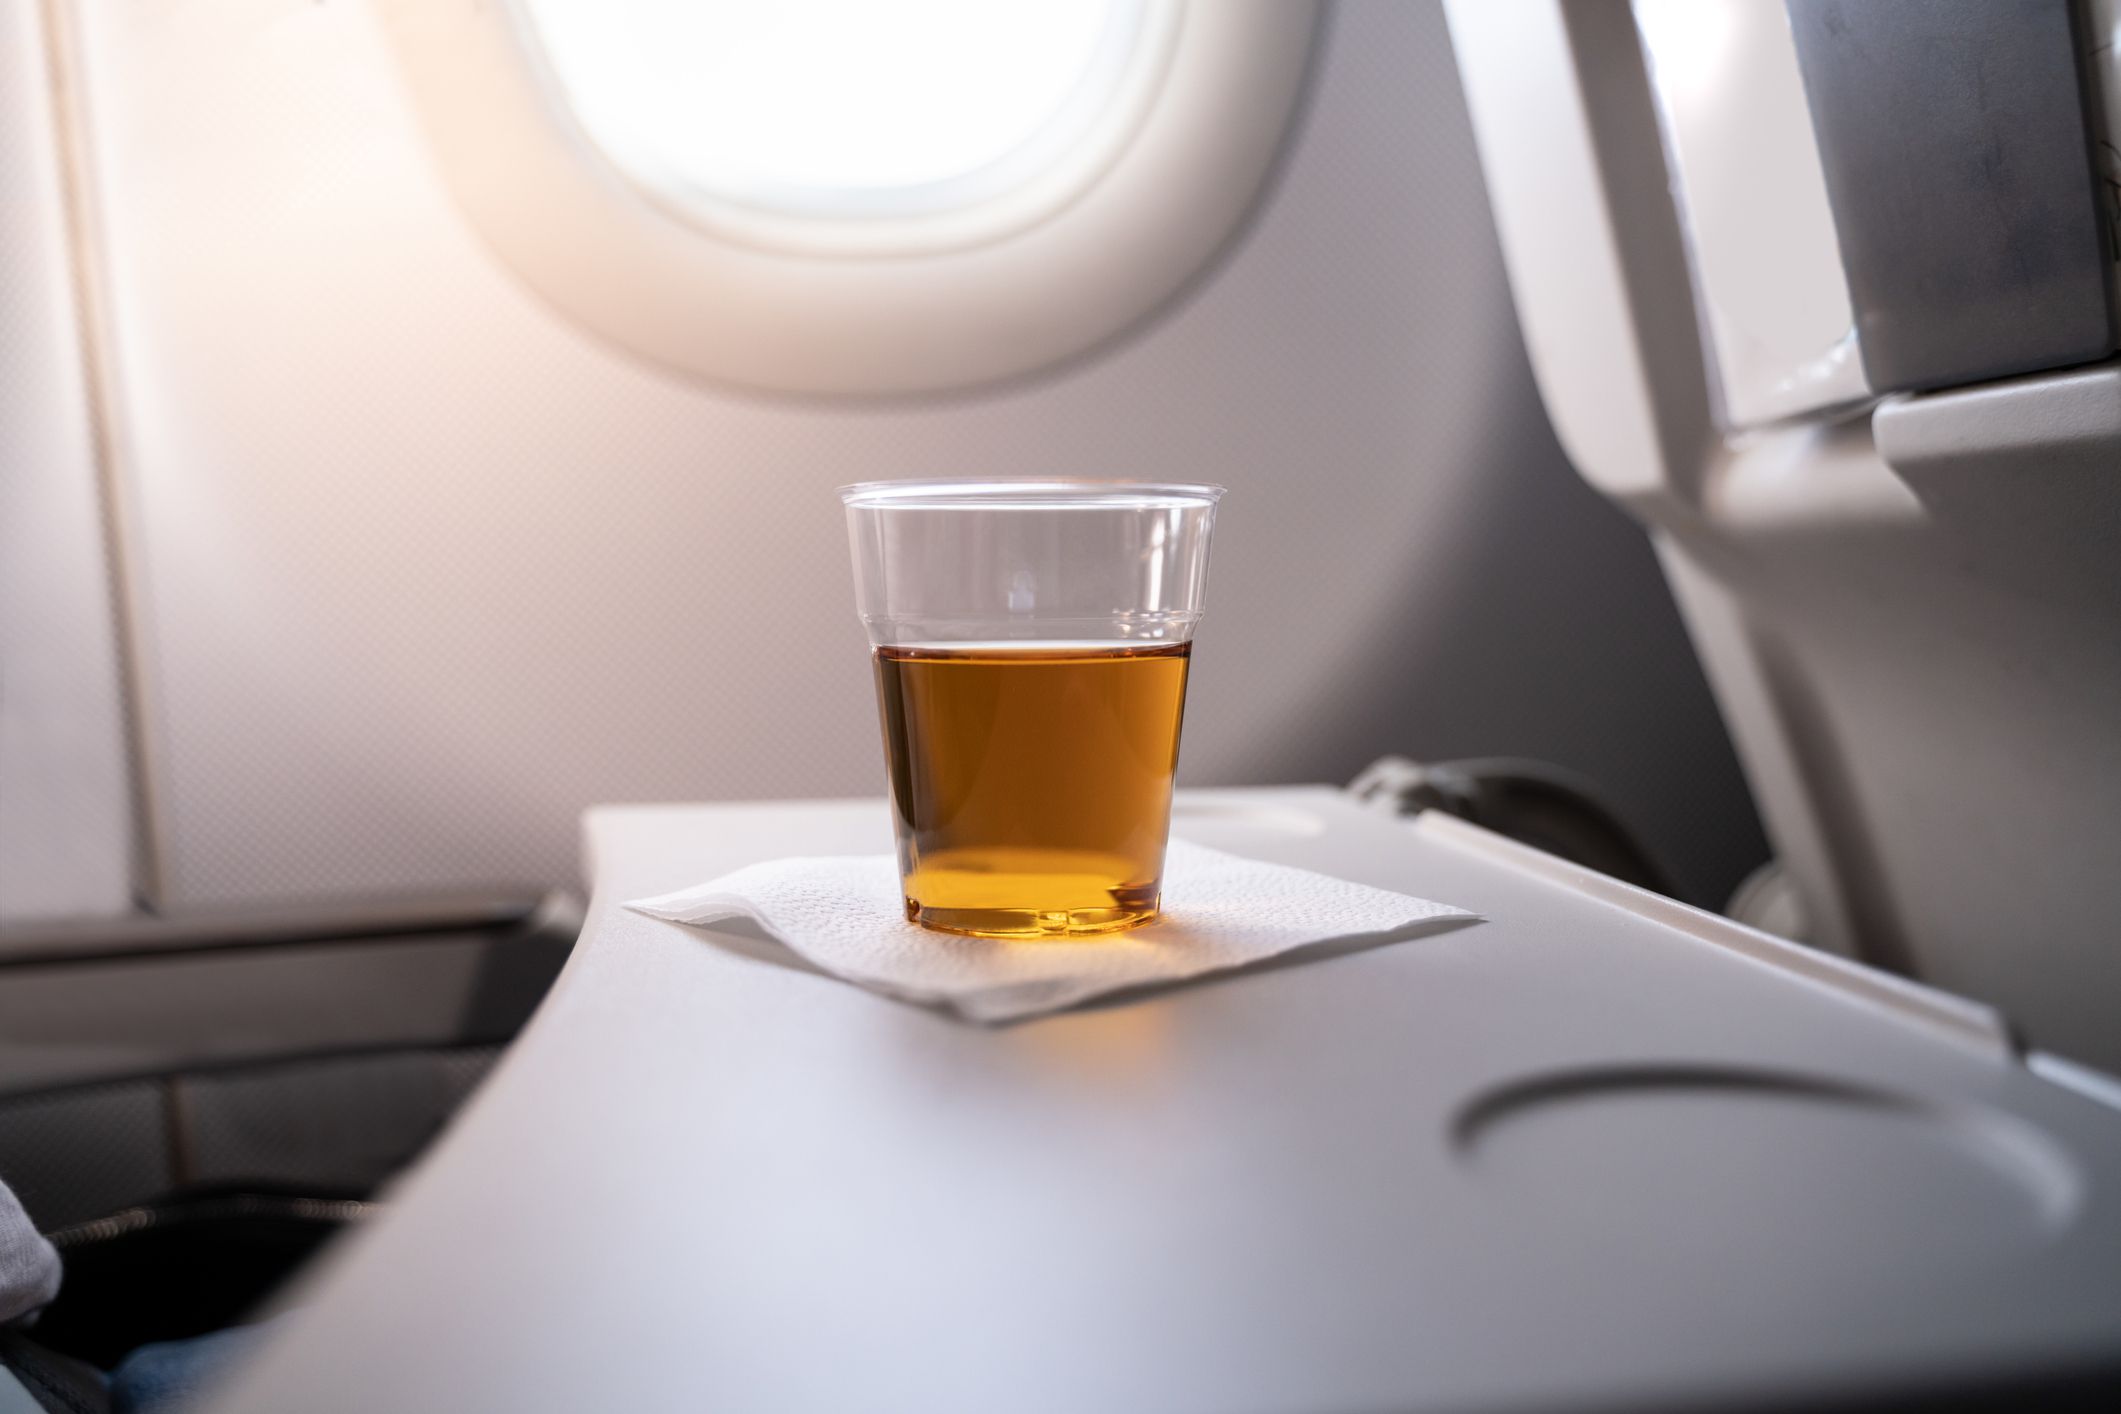 <p>Alcohol dehydrates you on the ground, and that effect is amplified when you're in a low humidity plane. Plus, the high altitude's affect on your blood oxygen can <a href="https://www.cntraveler.com/story/do-you-get-drunk-faster-on-a-plane#:~:text=Therefore%2C%20being%20at%20a%20higher,begin%20acting%20inebriated%20earlier%20than">make you feel tipsy faster than usual</a>. Both those things can lead to feeling pretty hungover when you're back on the ground, which is a terrible way to start a vacation. </p>